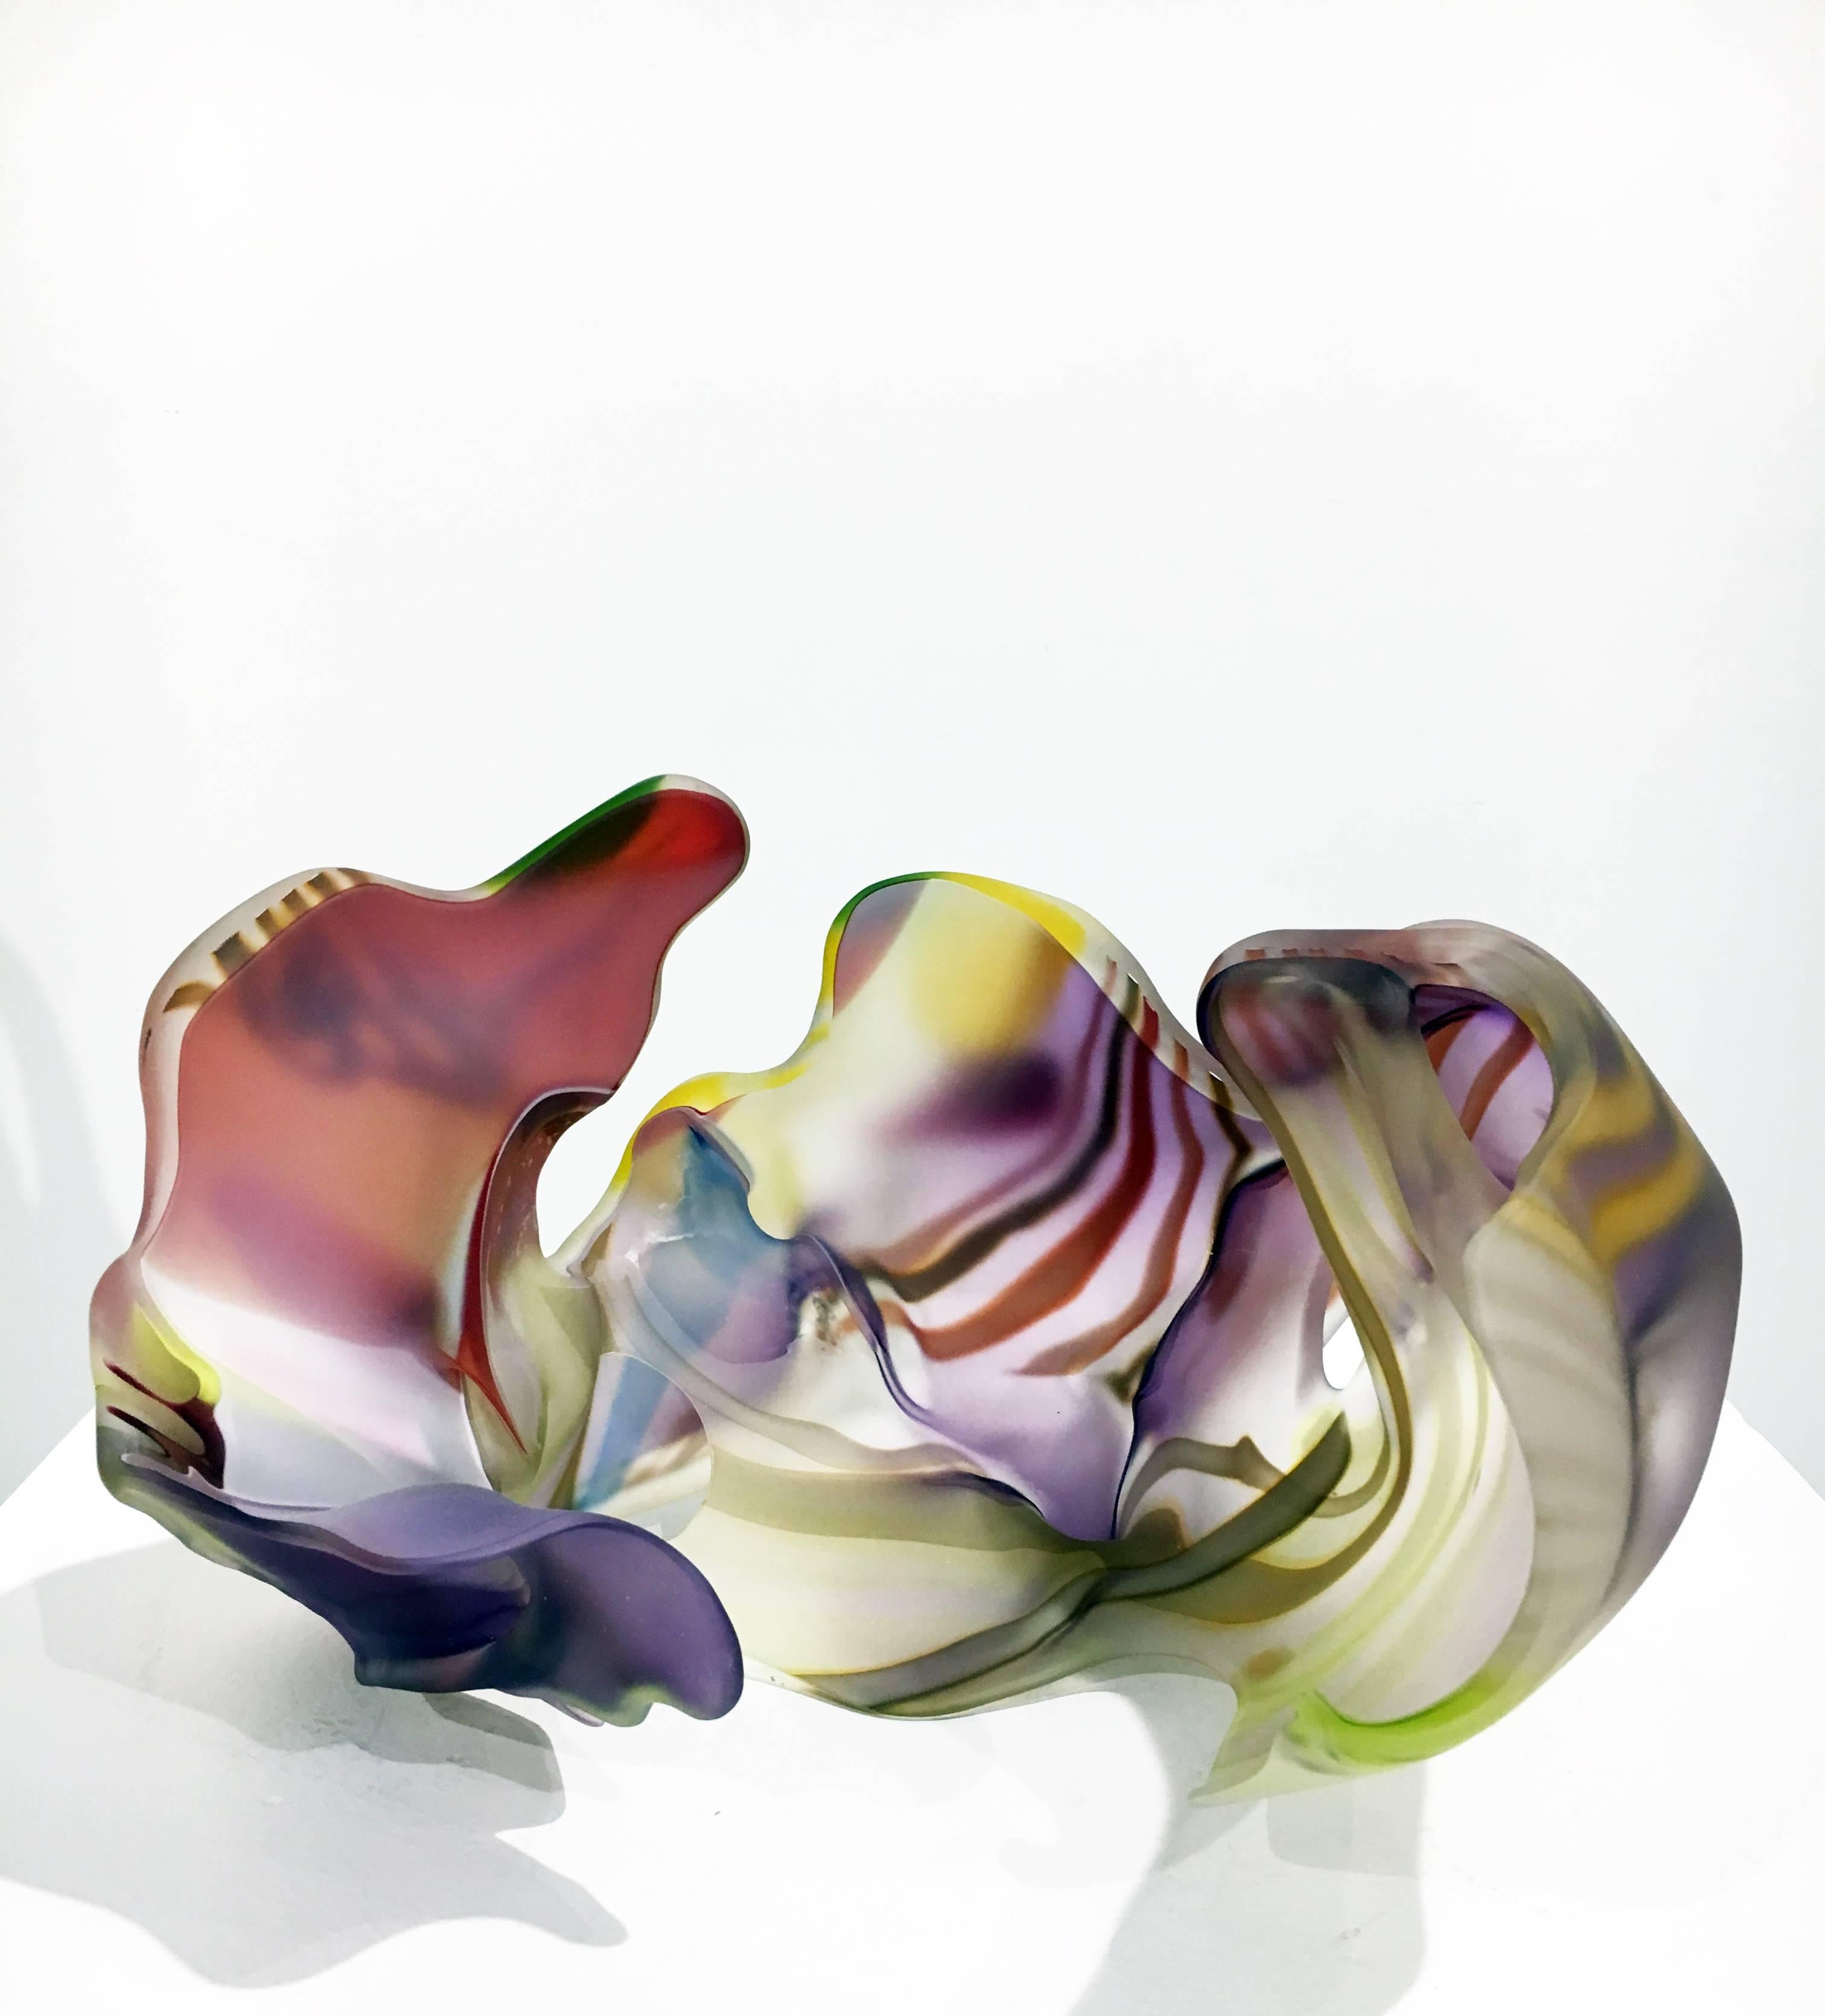 Marvin Lipofsky 1938 - 2016

Lipofsky approached glass as an organic, sculptural medium; resulting in his signature amorphic forms. Many of his works are colorful “bubbles” of glass. Often semi-transluscent, they allow the viewer to examine their